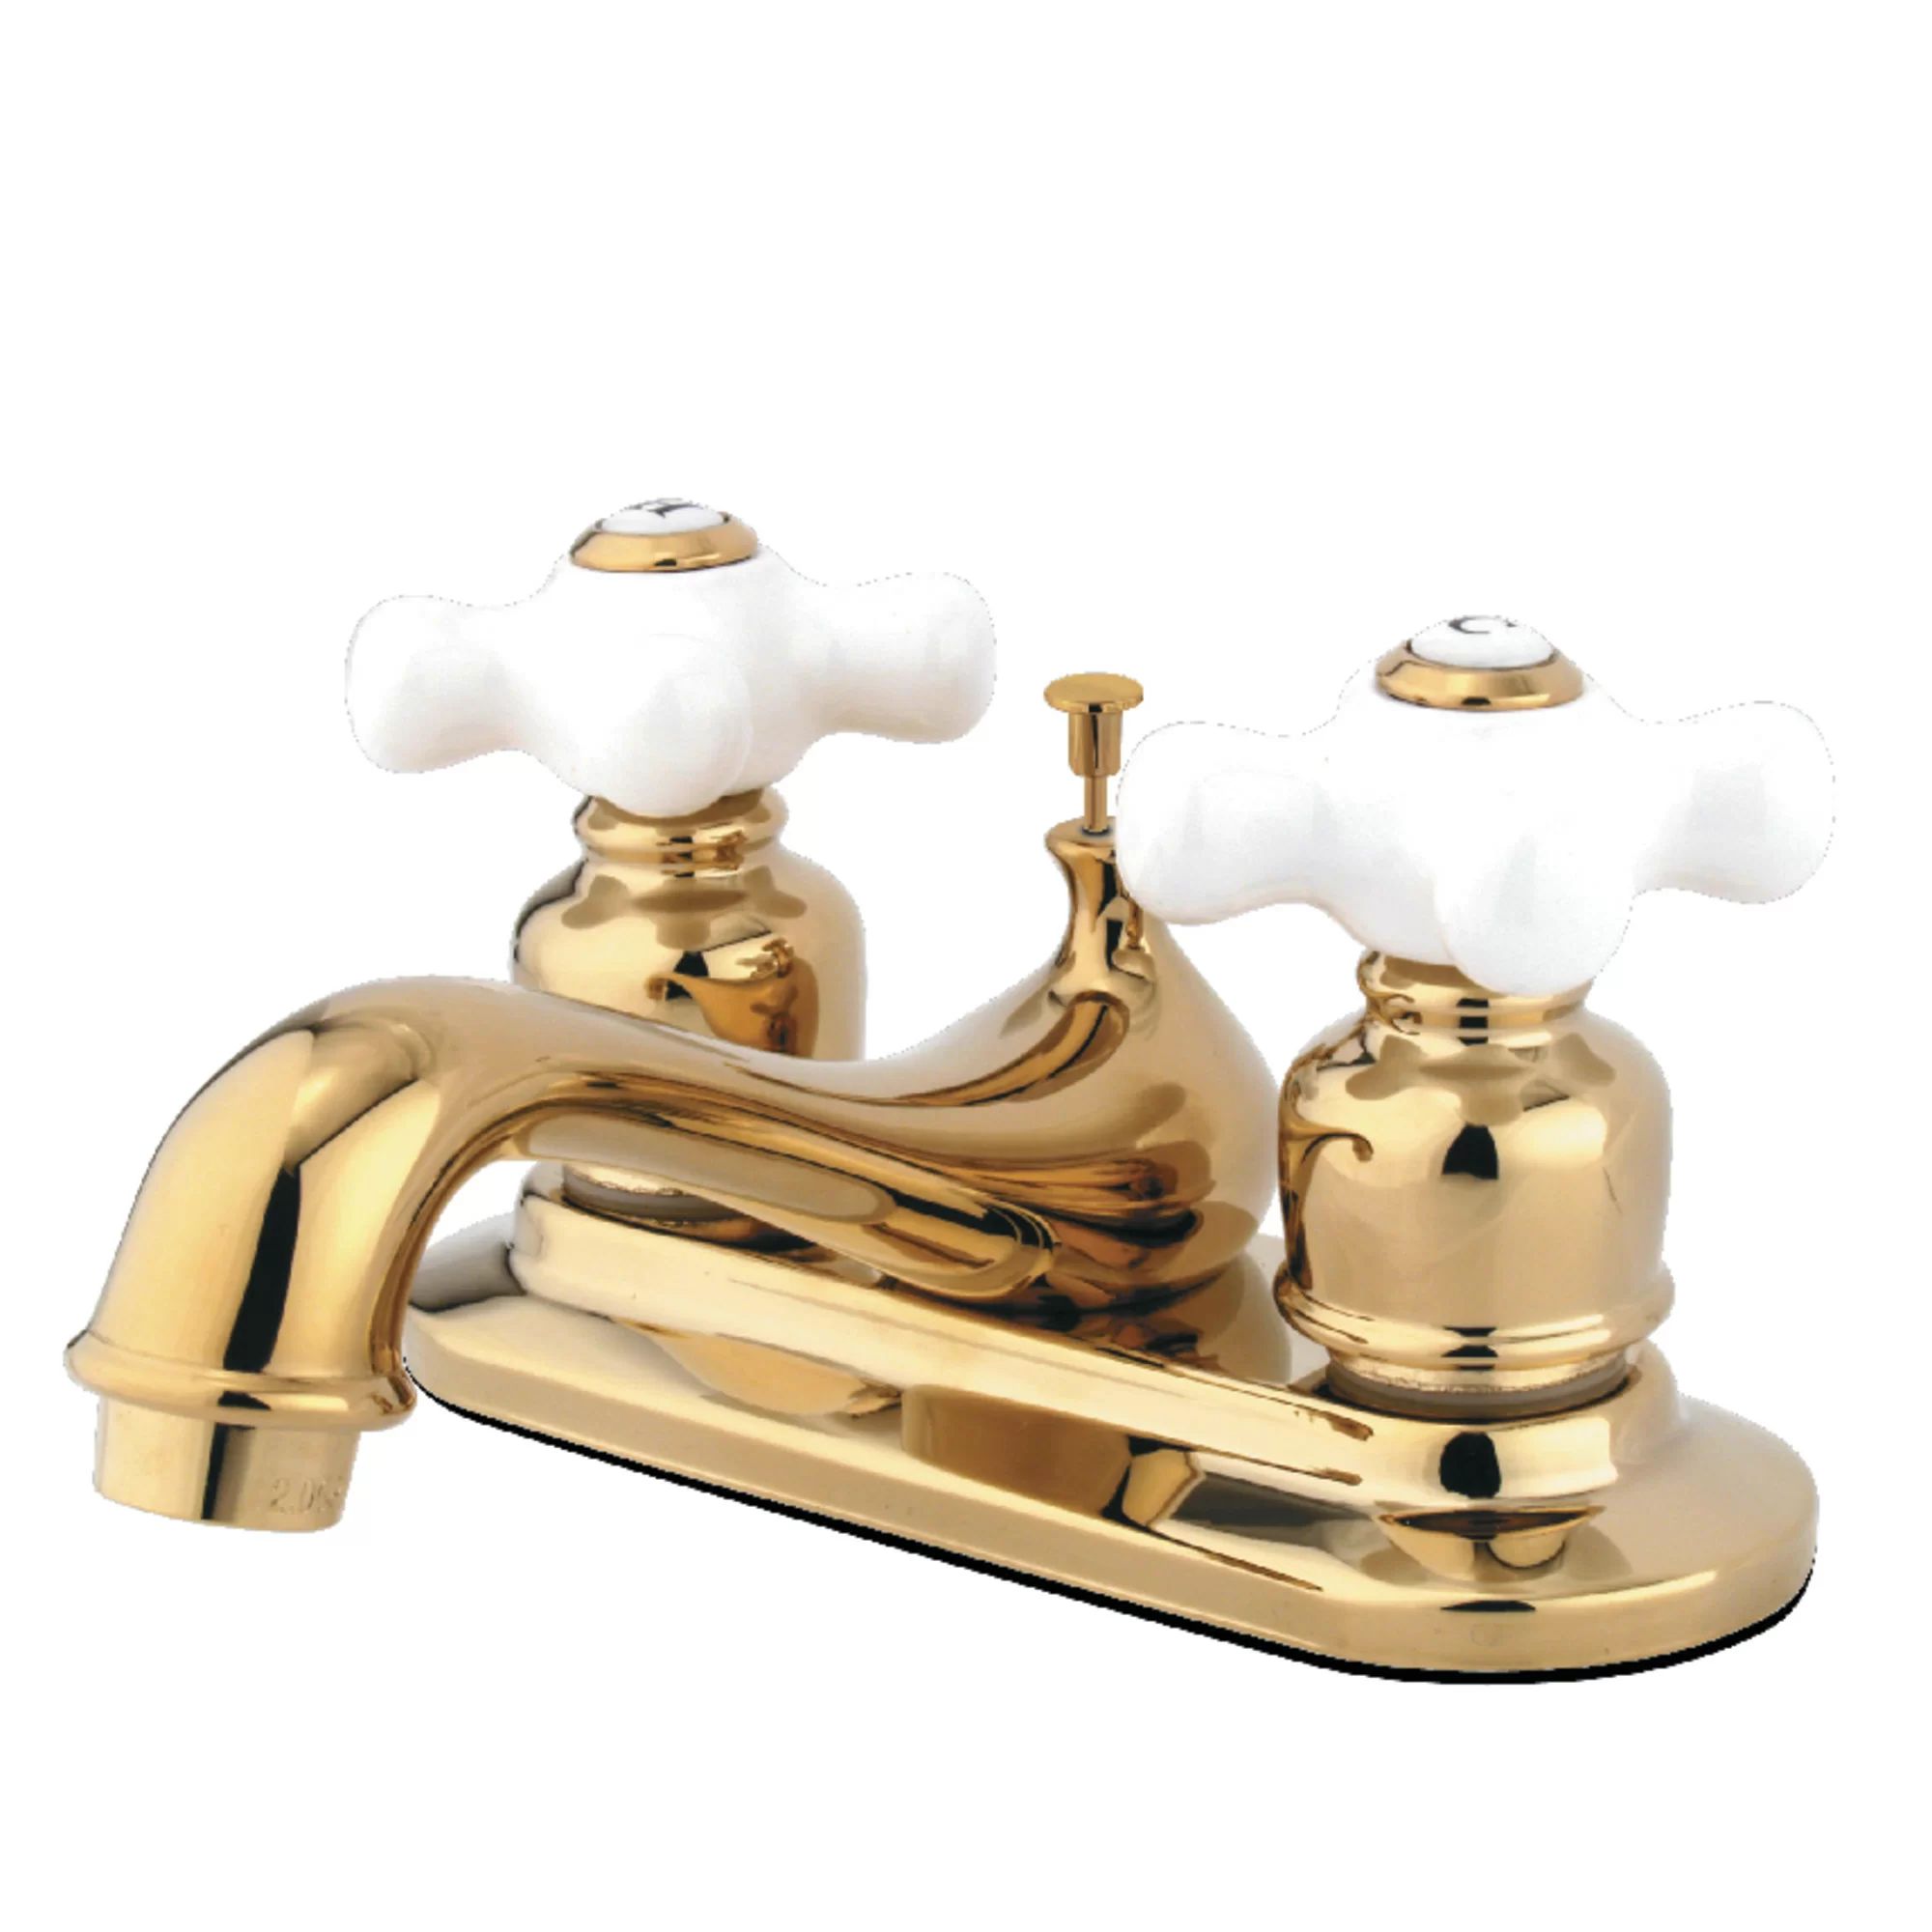 Restoration Centerset Bathroom Faucet with Drain Assembly | Wayfair North America